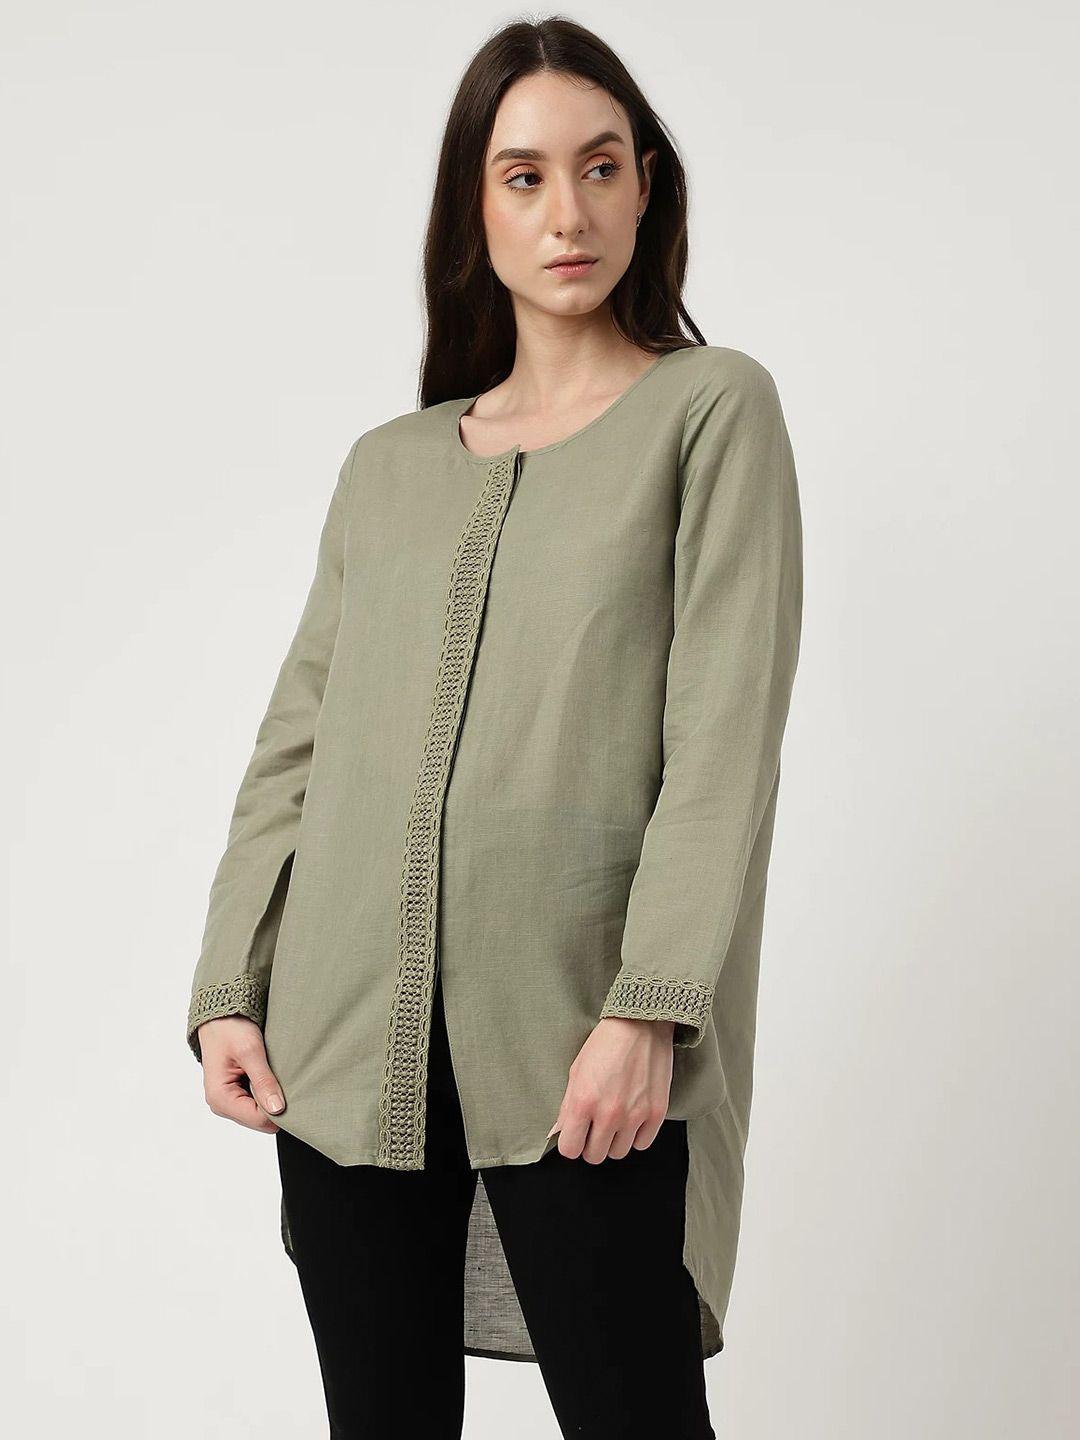 marks & spencer round neck linen high-low top